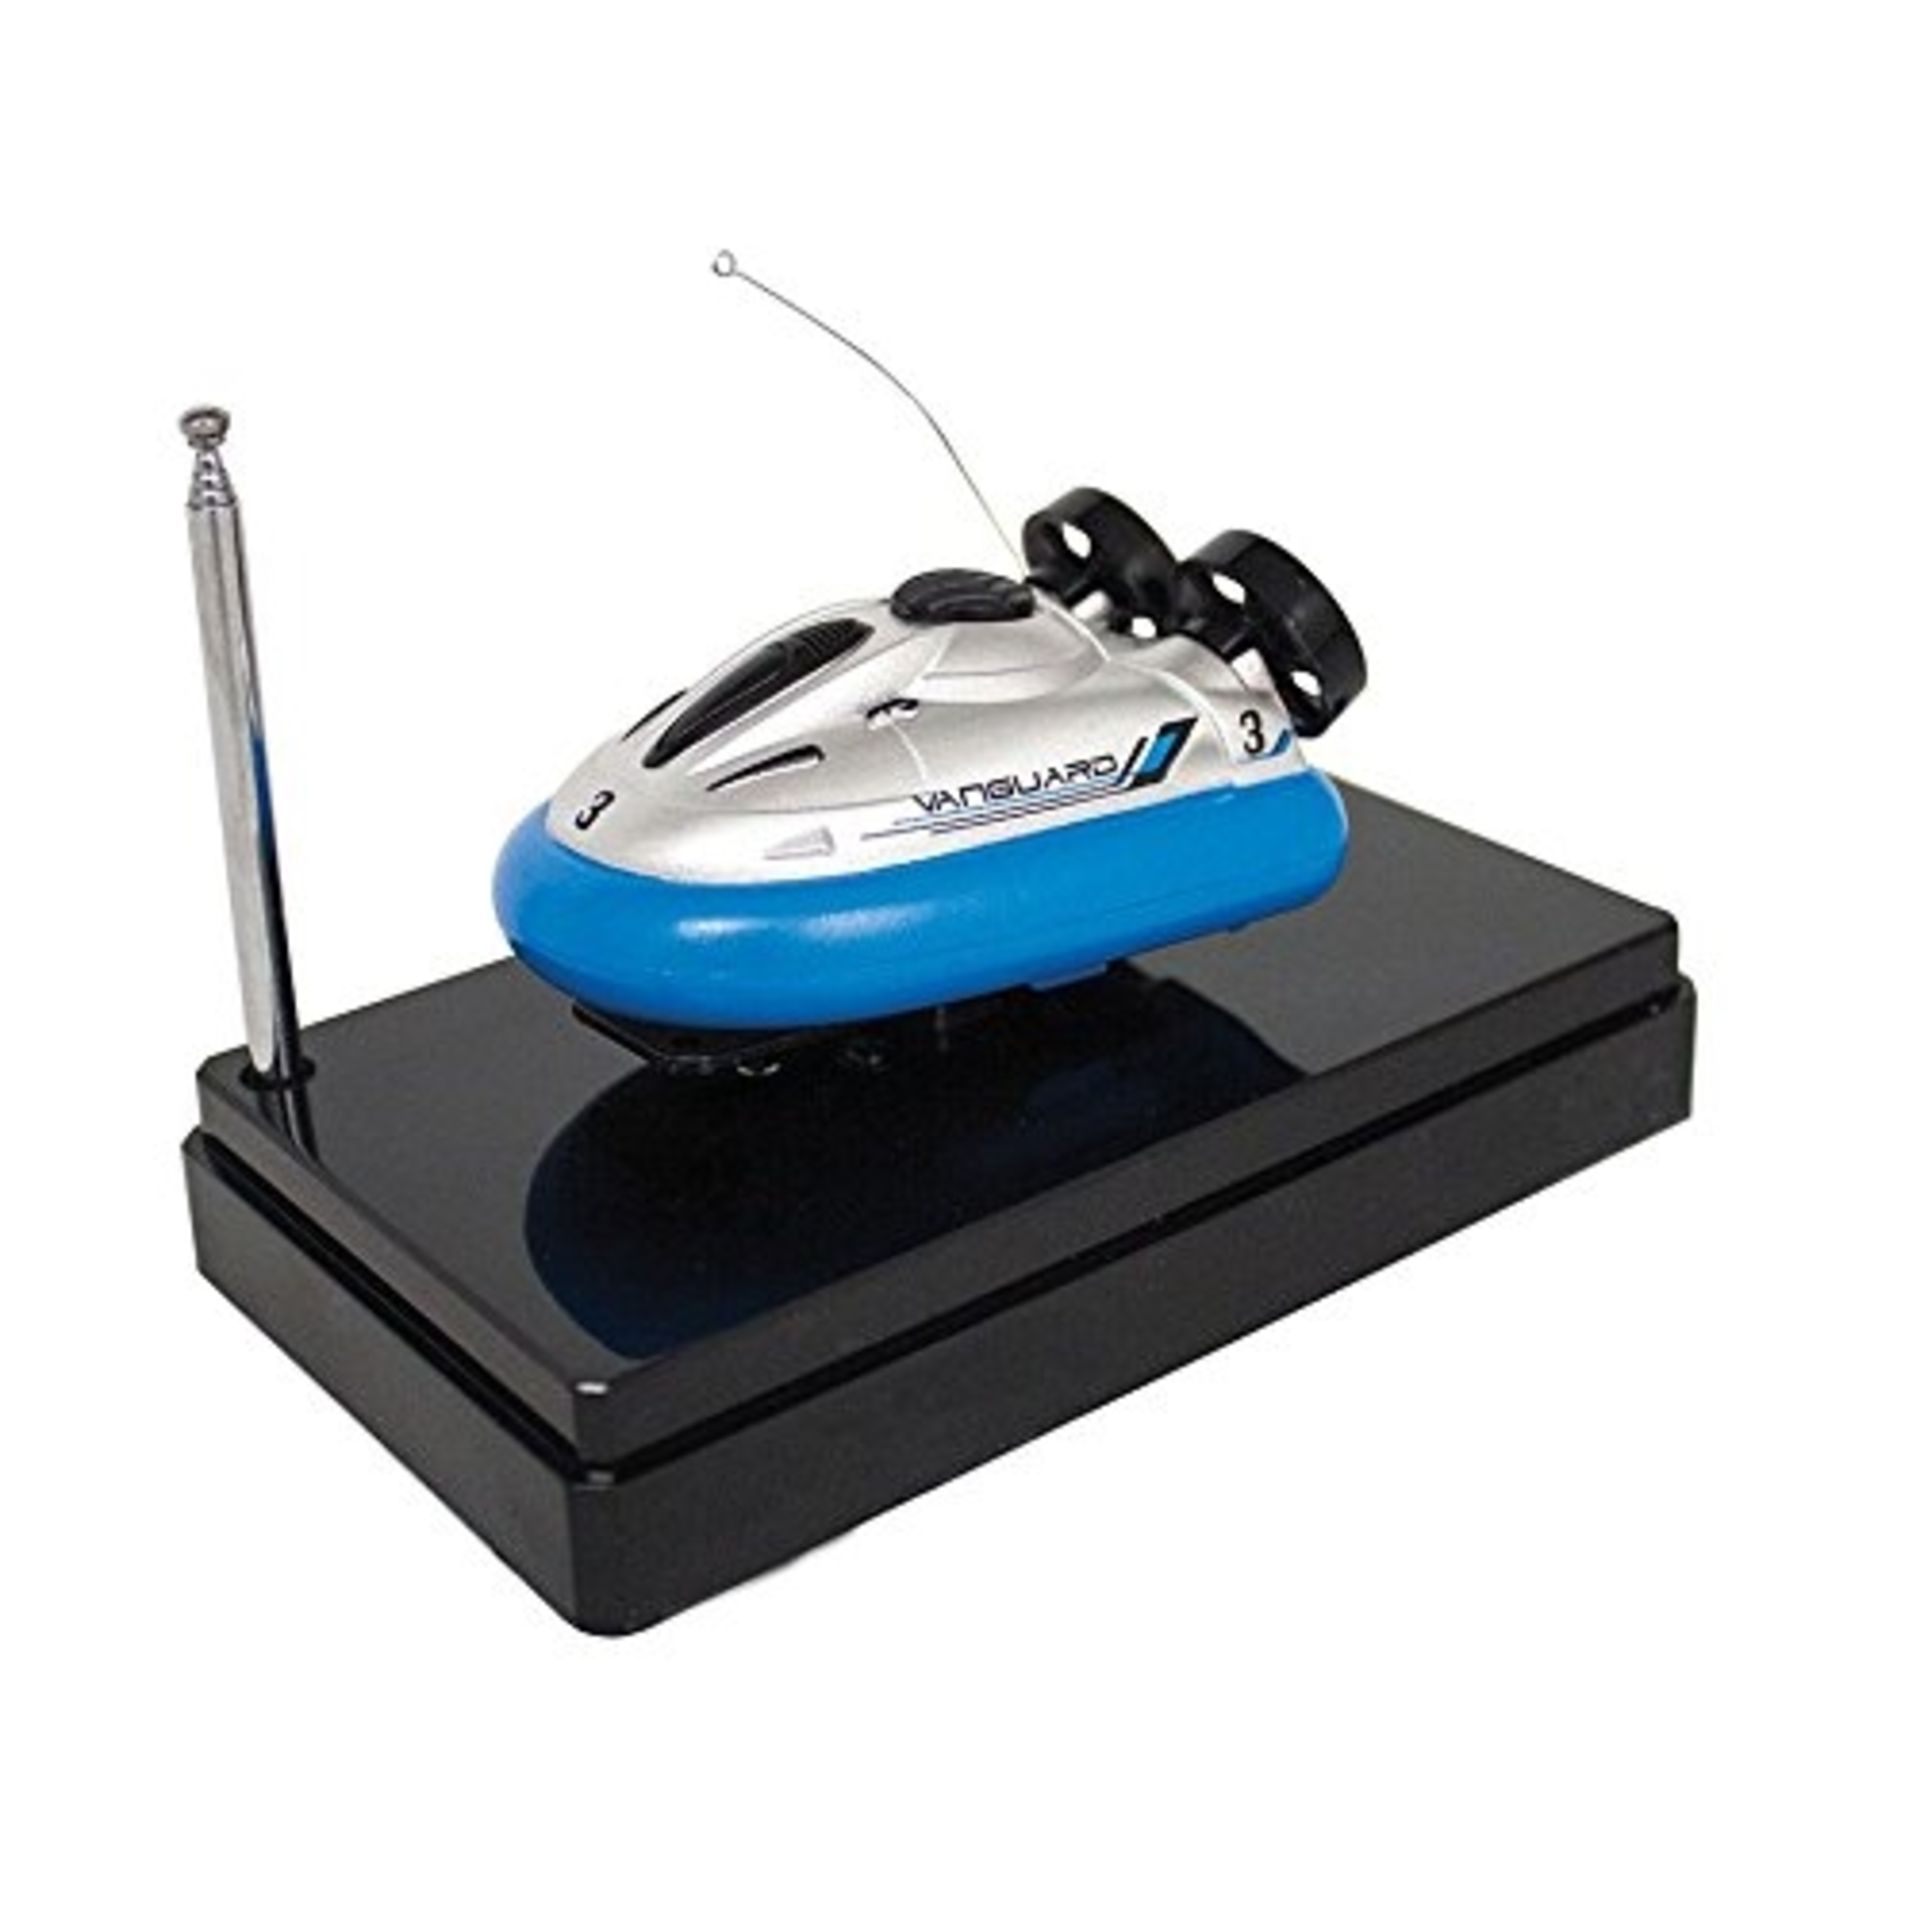 V Brand New Radio Controlled Hovercraft Twin prop Boat Various Colours ISP £14.99 (Ebay) inc hand